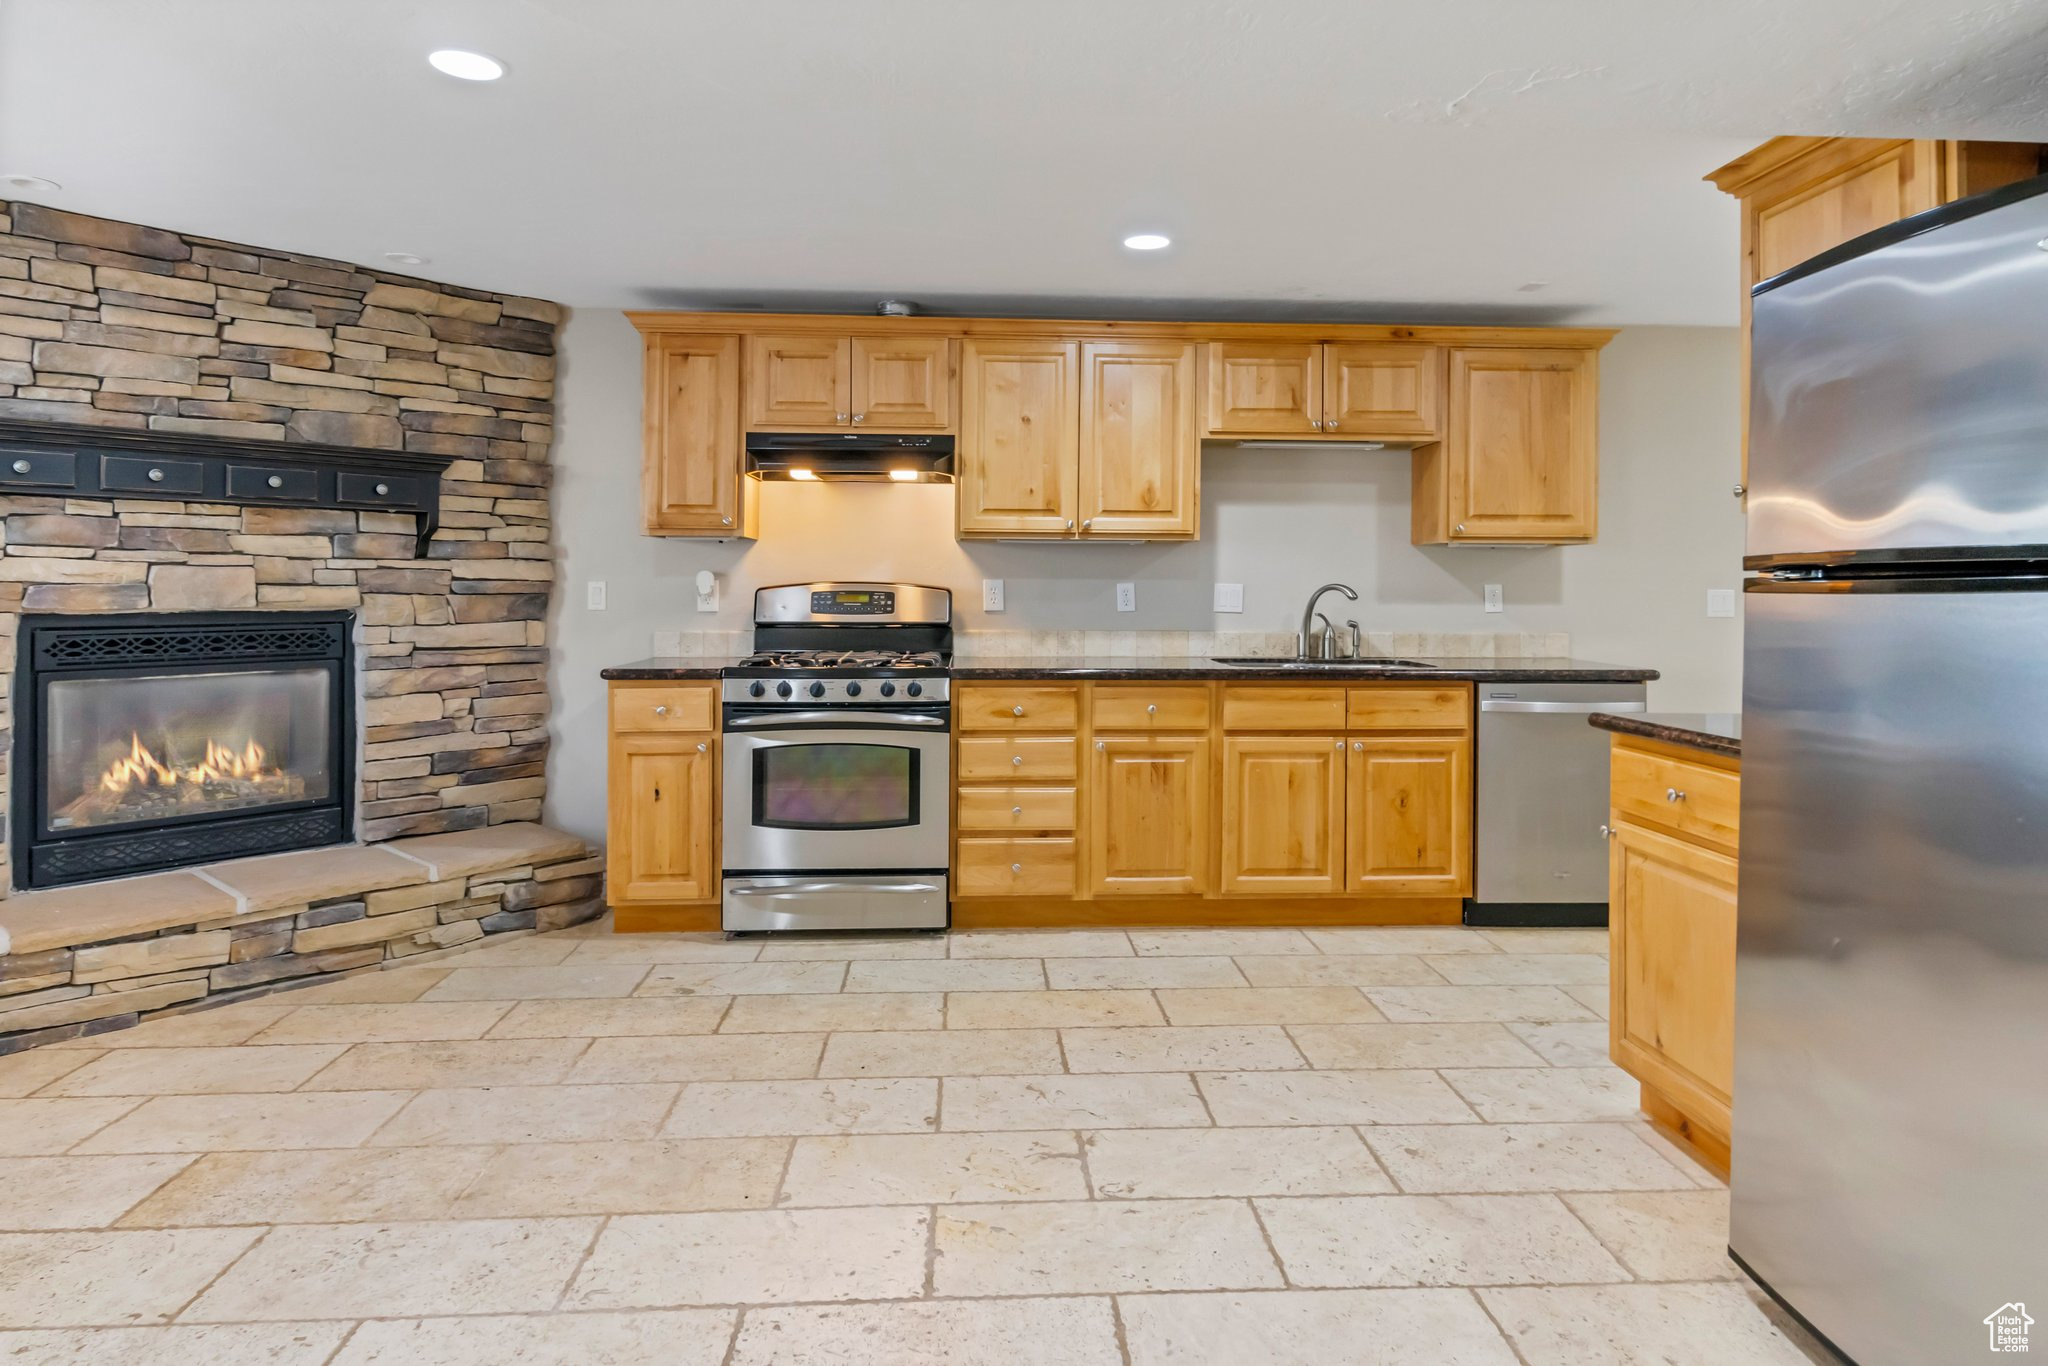 Kitchen with a stone fireplace, stainless steel appliances, light tile flooring, dark stone countertops, and sink